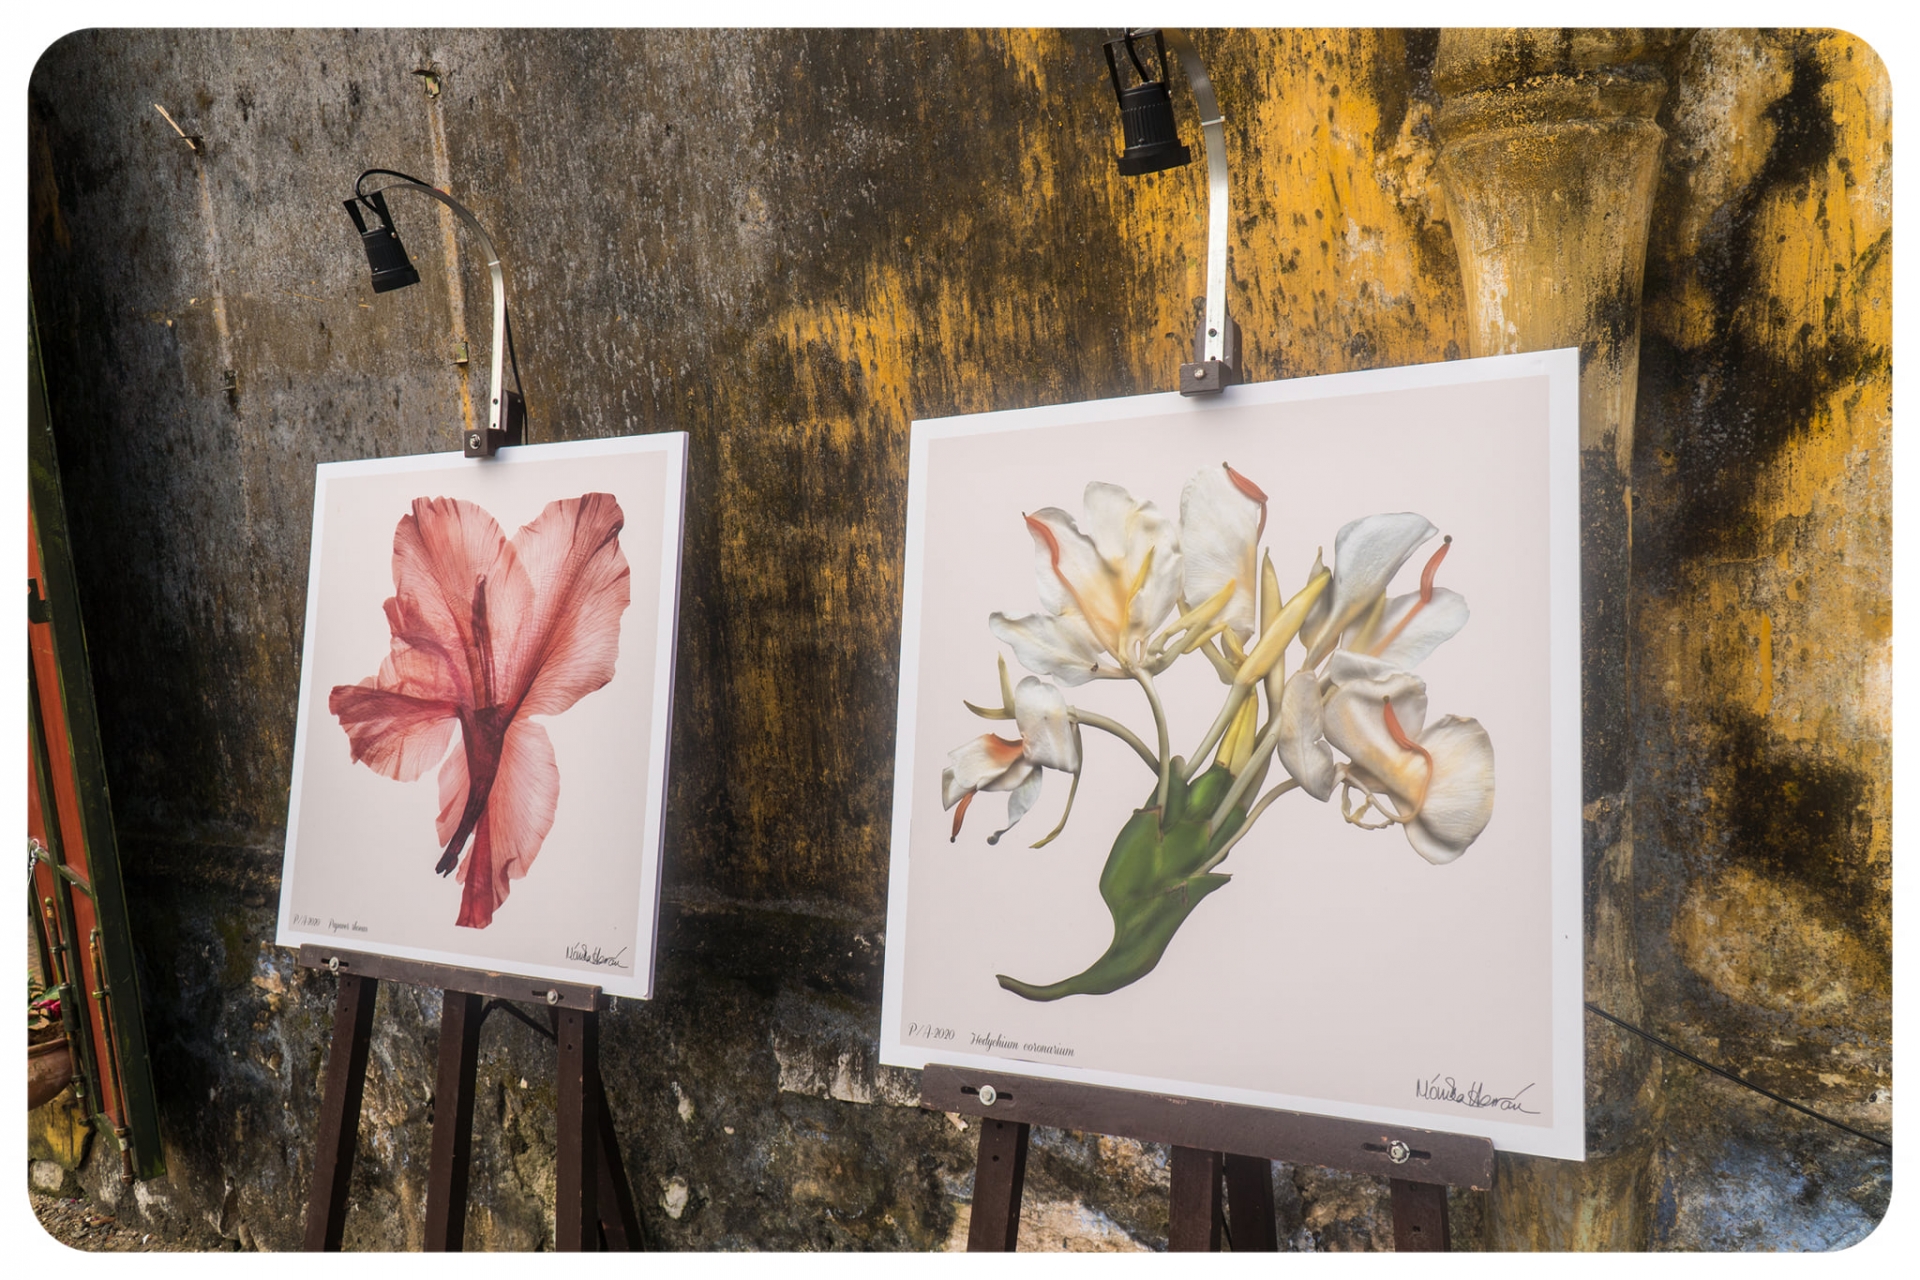 Exhibition introduces colombian flowers in hoi an city